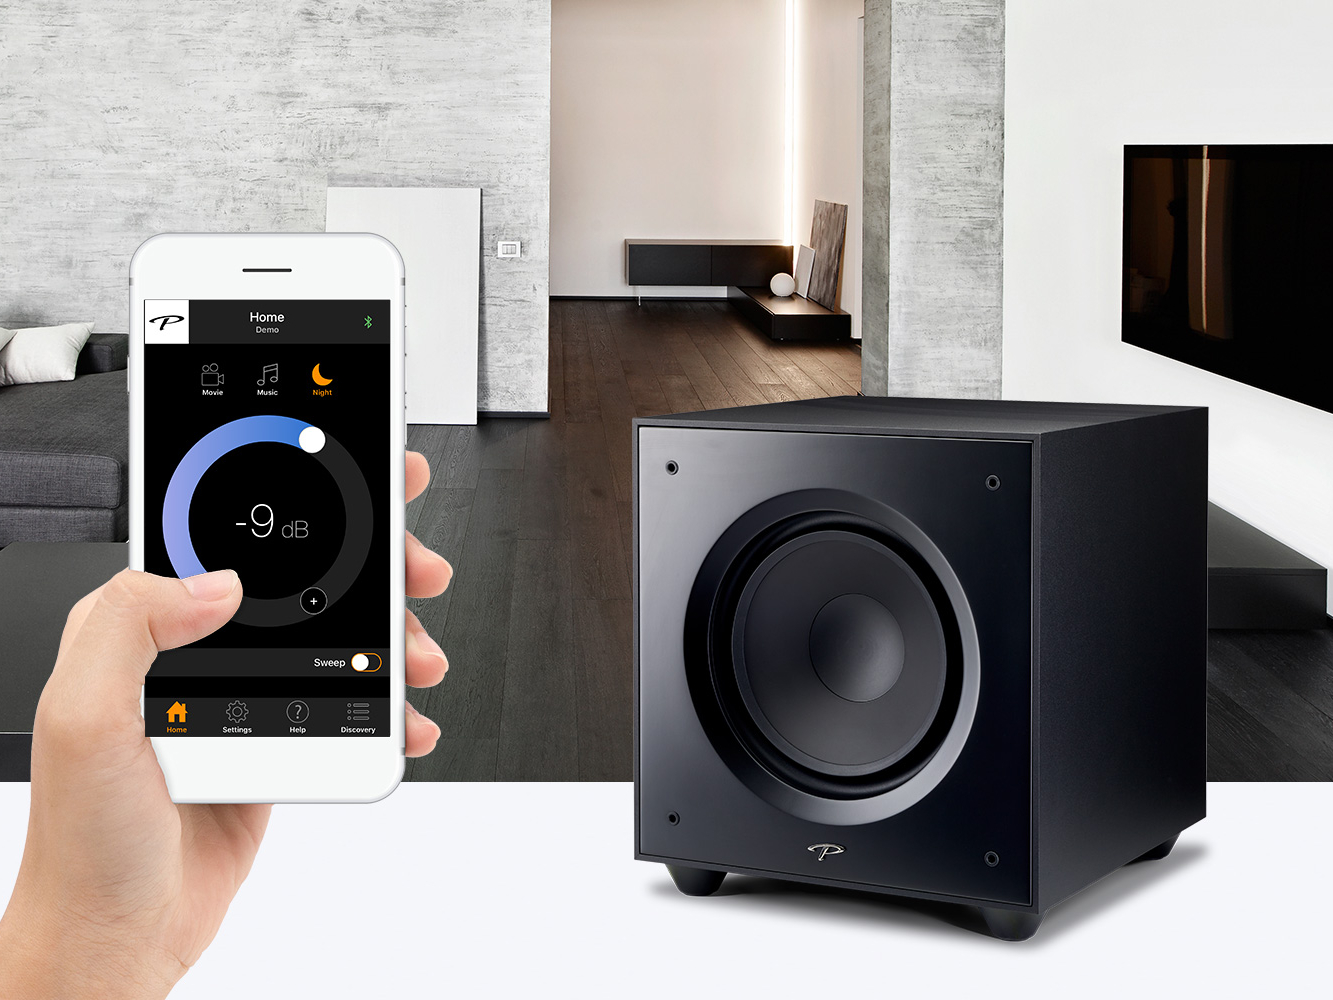 Paradigm Subwoofer control app for both Android and iOS